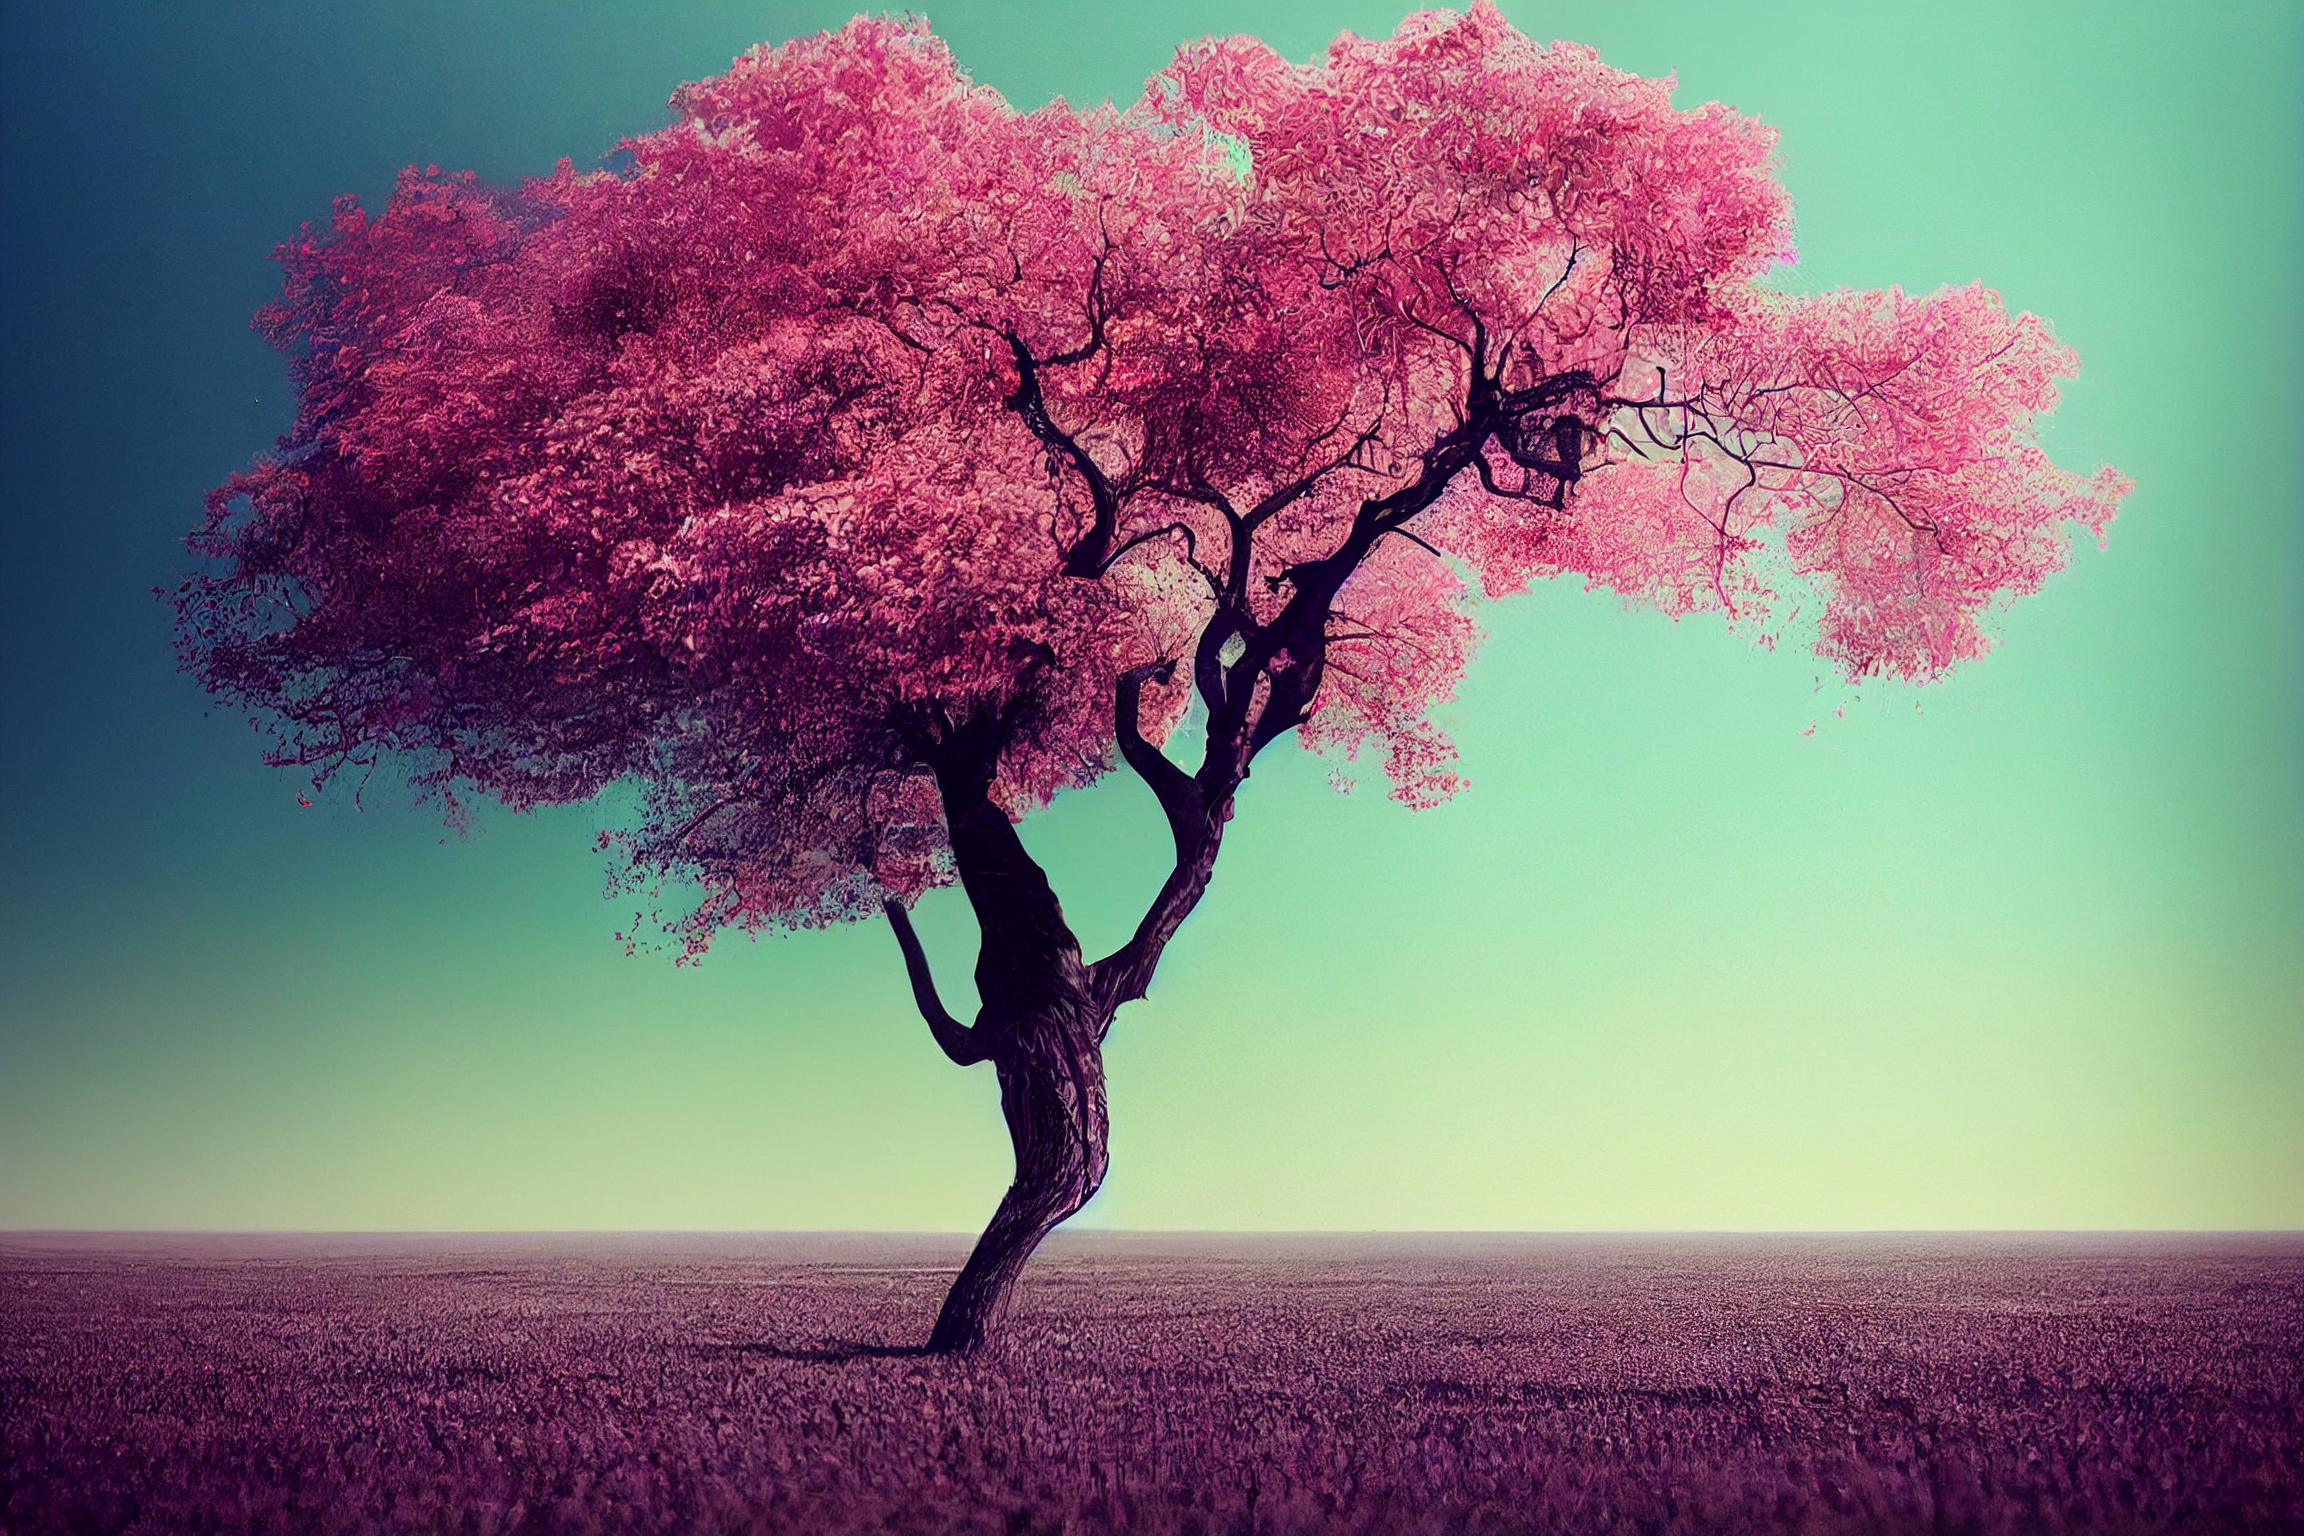 I’ll keep my head up high through the downs and lows – Surreal tree